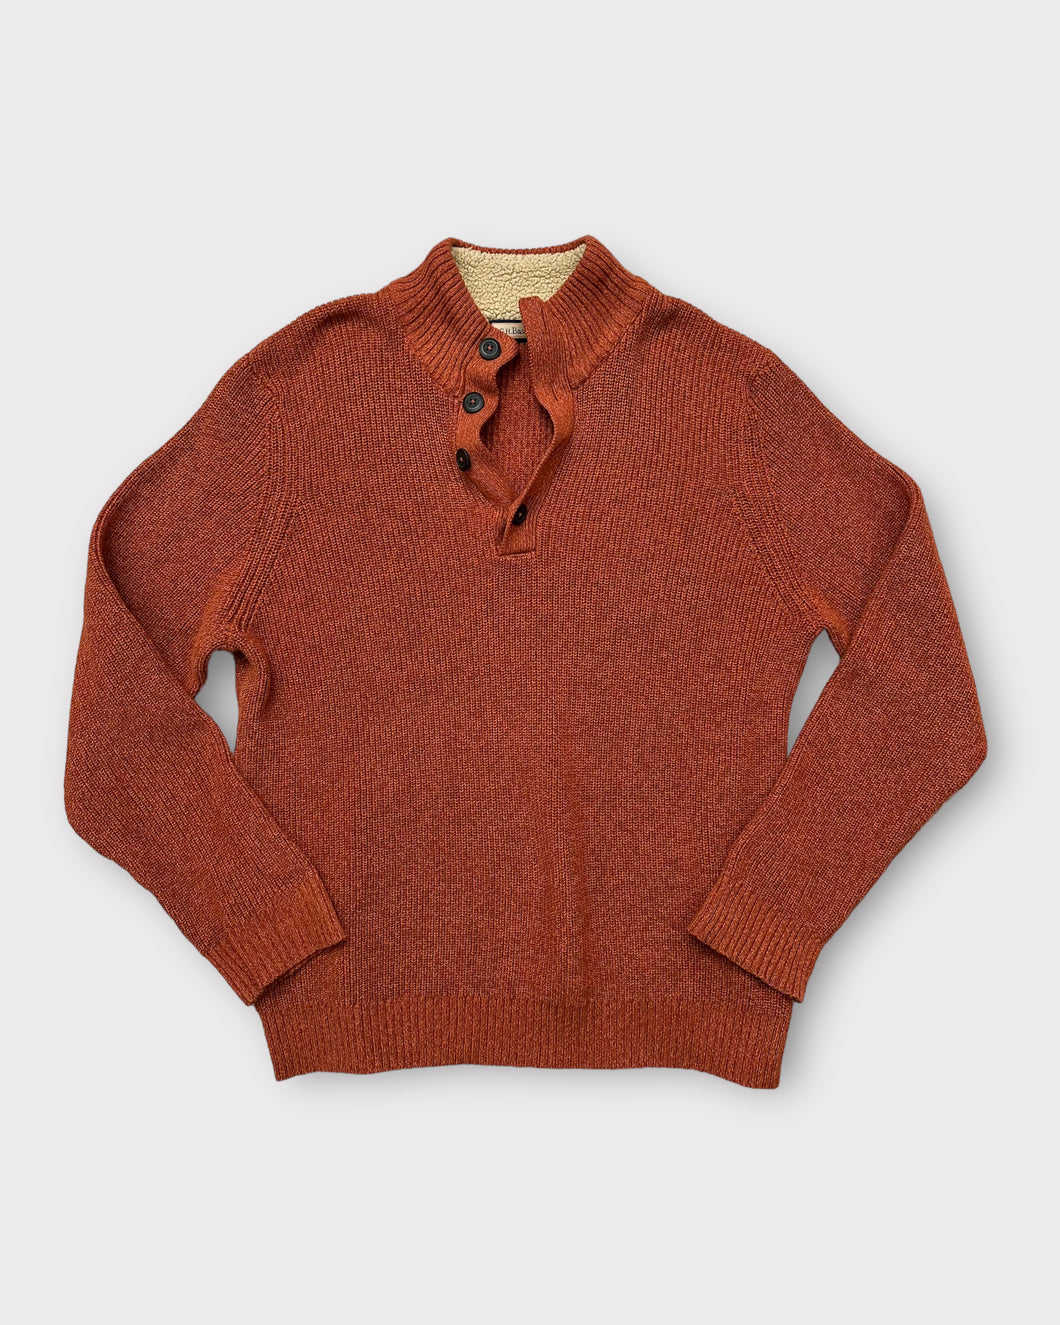 GH Bass & Co Orange Knit Pullover with Sherpa Lined Collar (XL)